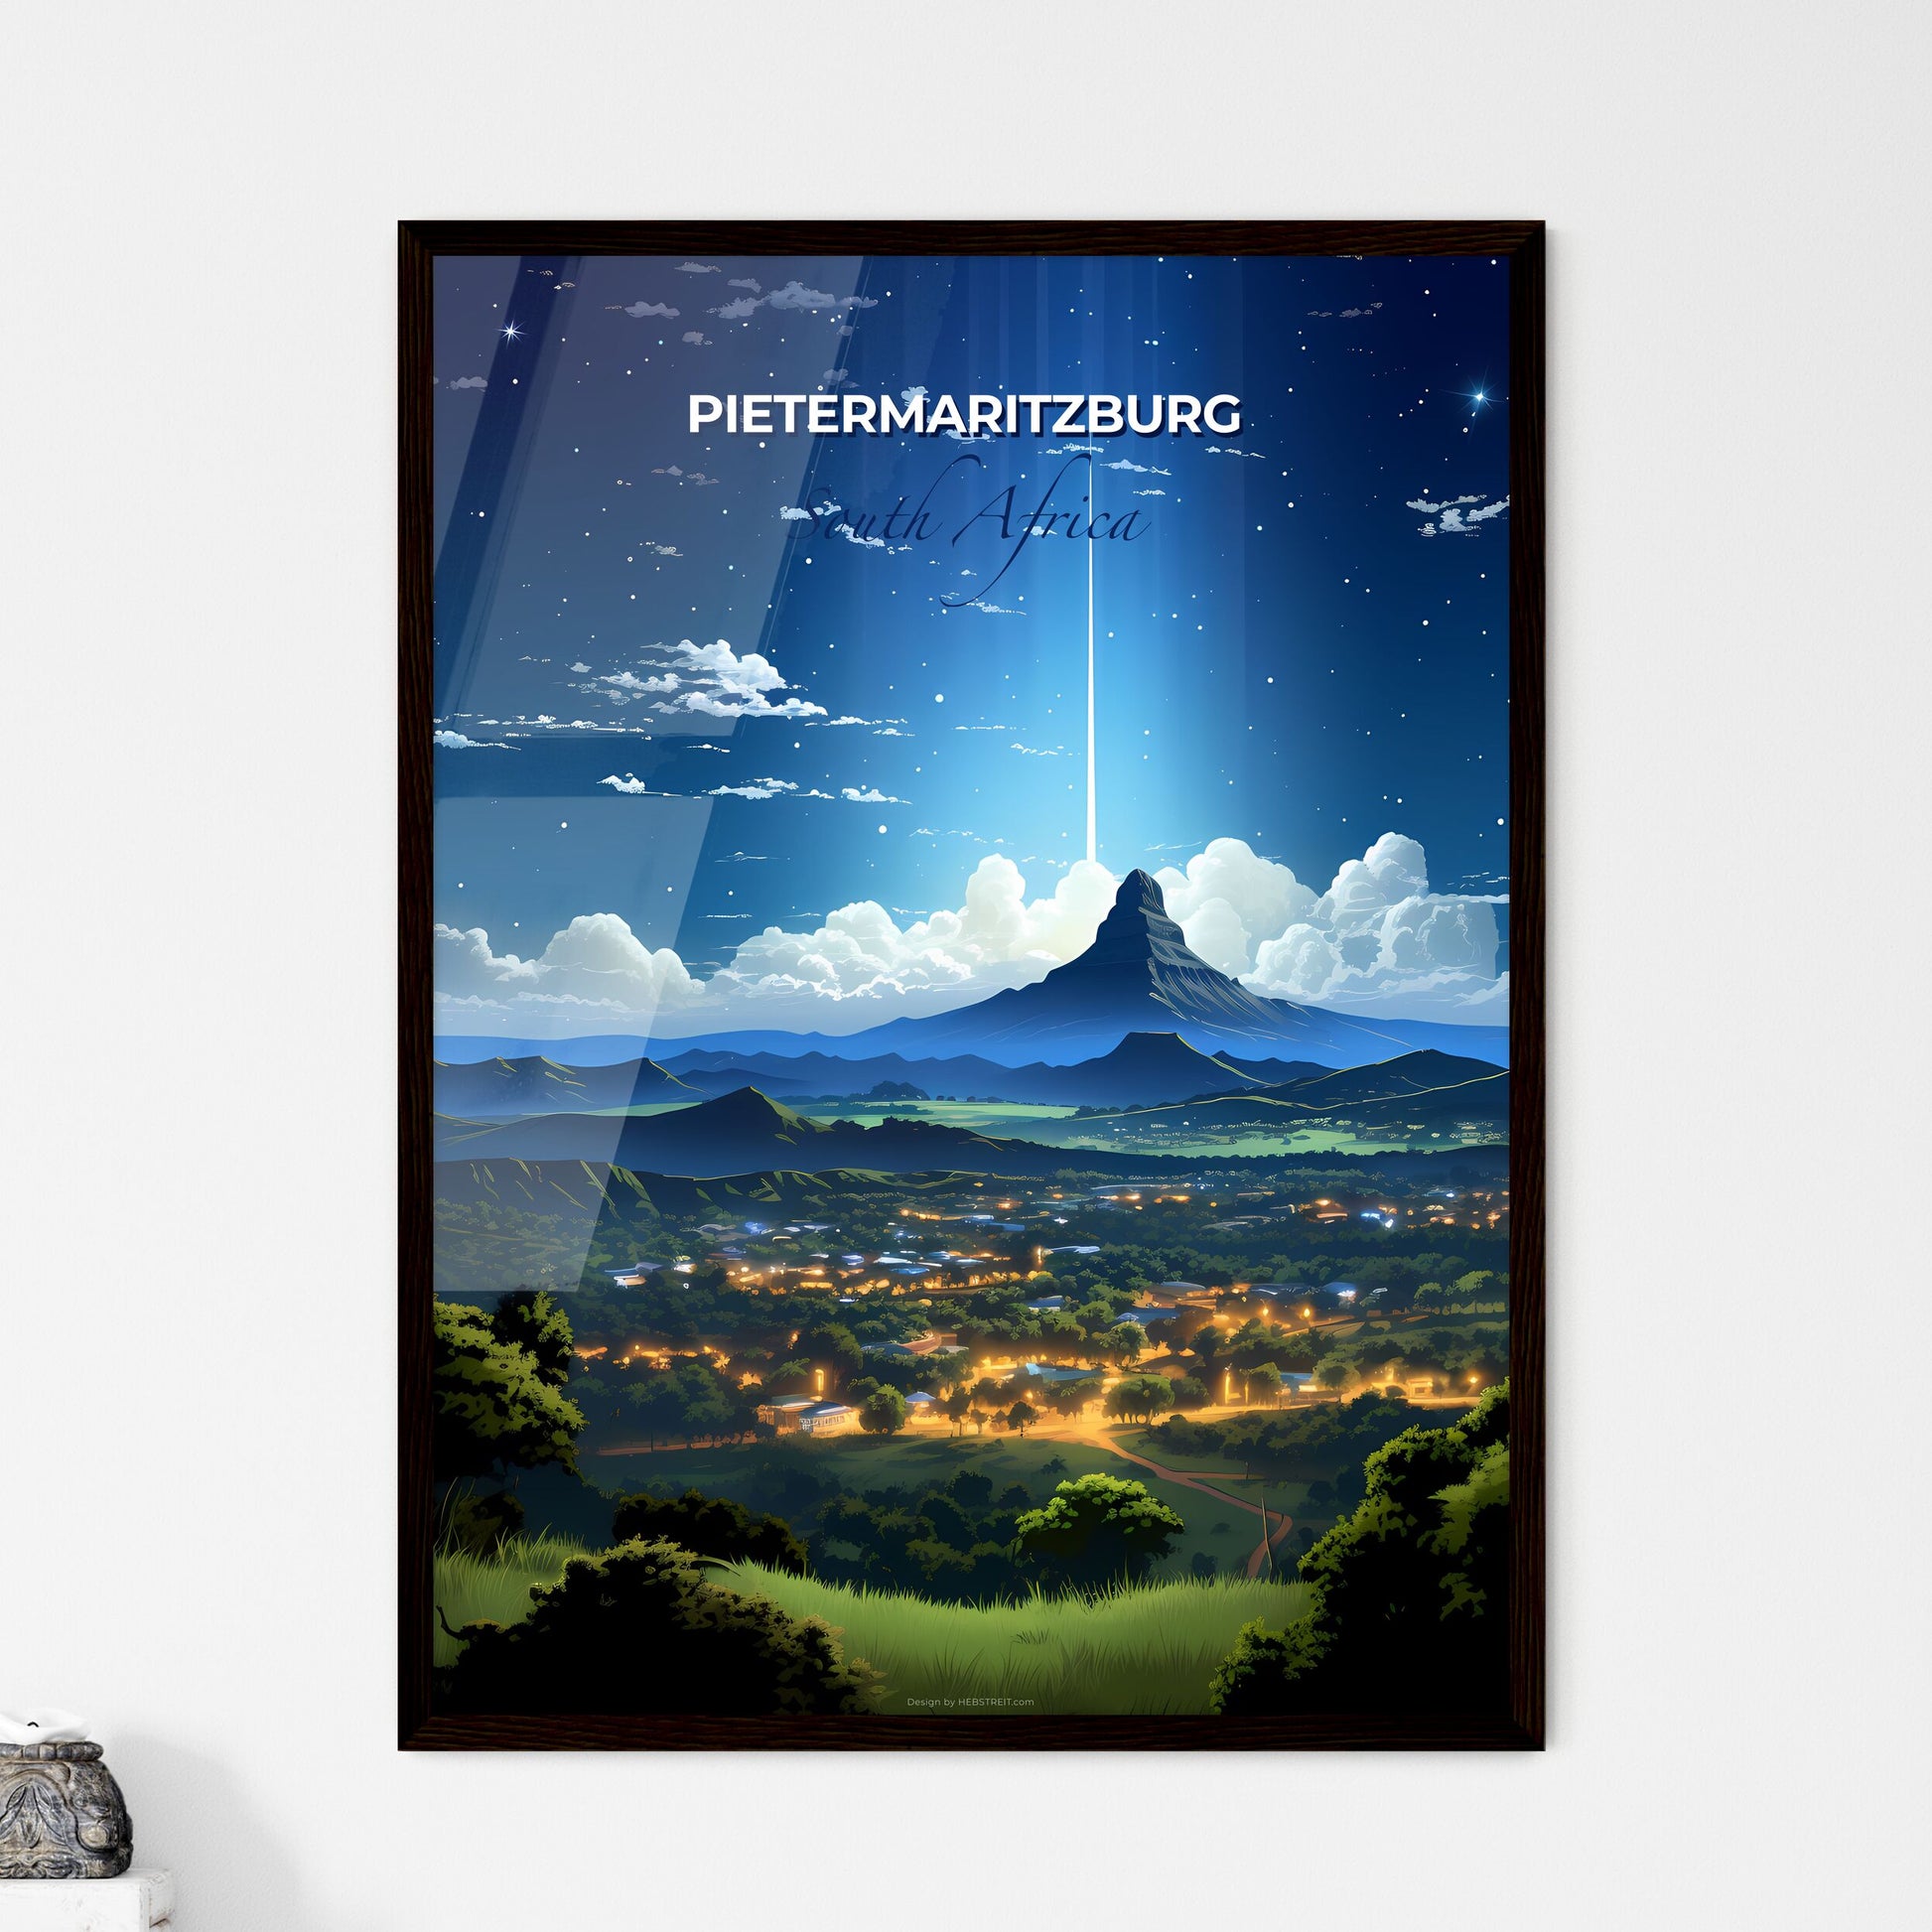 Artistic Landscape Painting of Pietermaritzburg Skyline, South Africa, Featuring a Vibrant City and Majestic Mountain Default Title